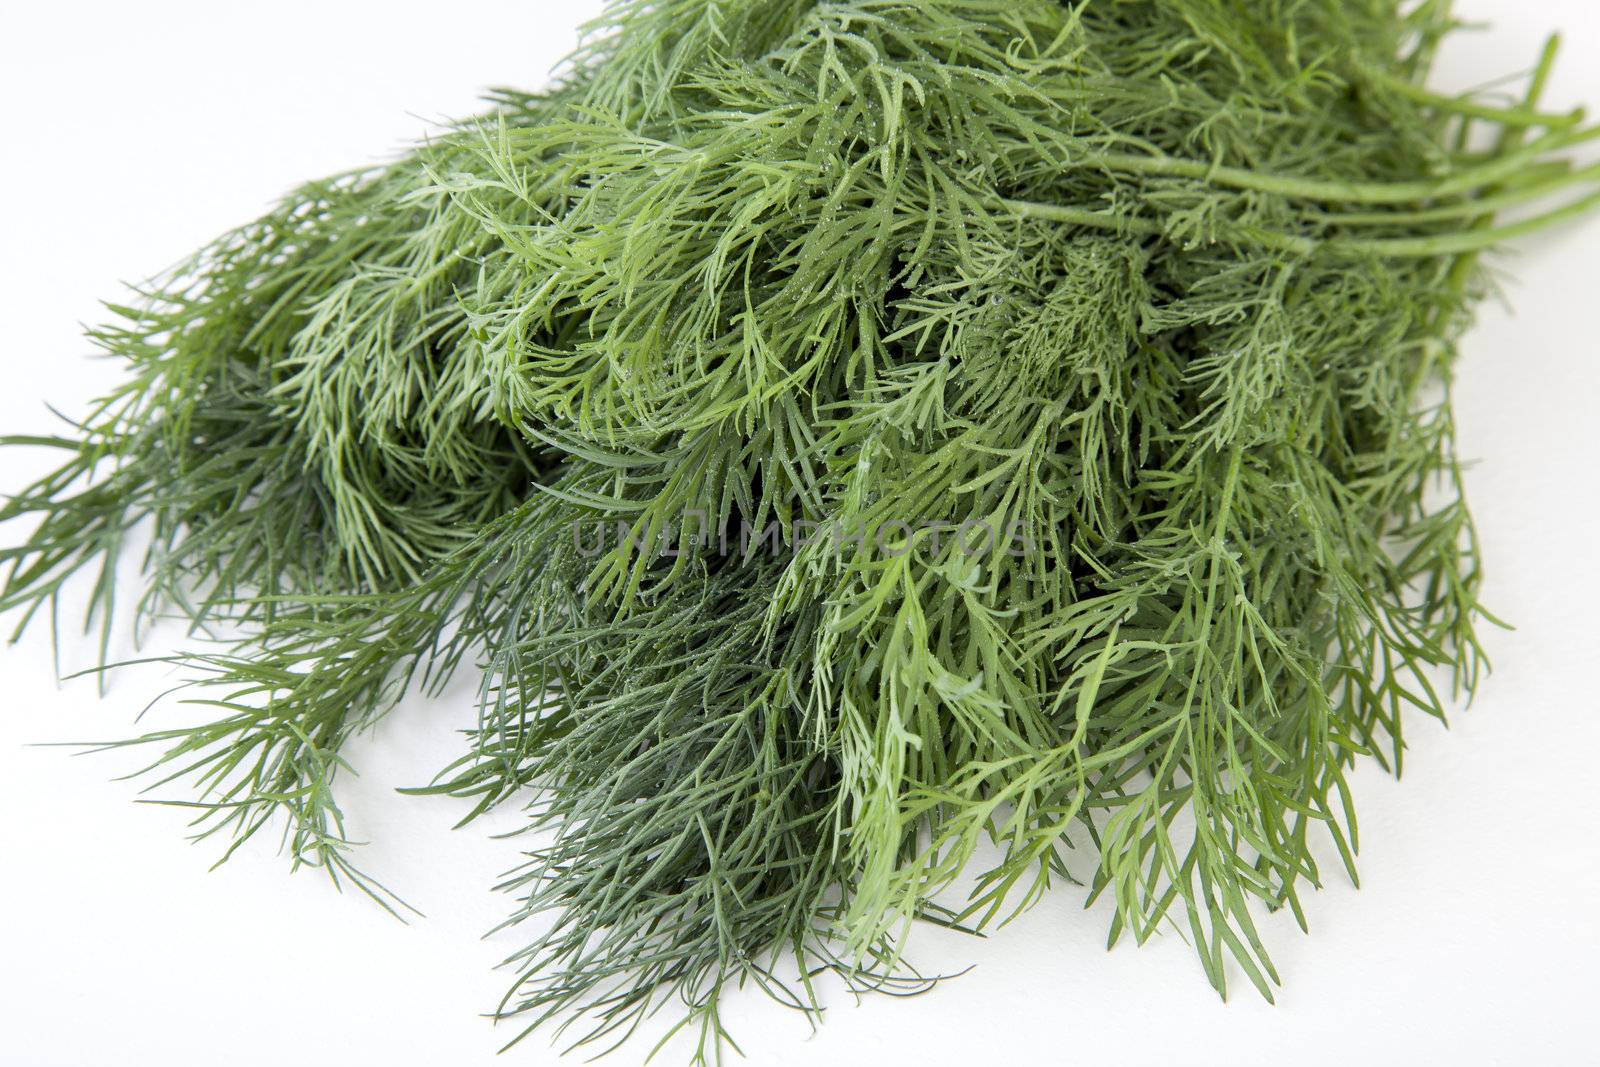 Fresh dill covered in drops of water on white background